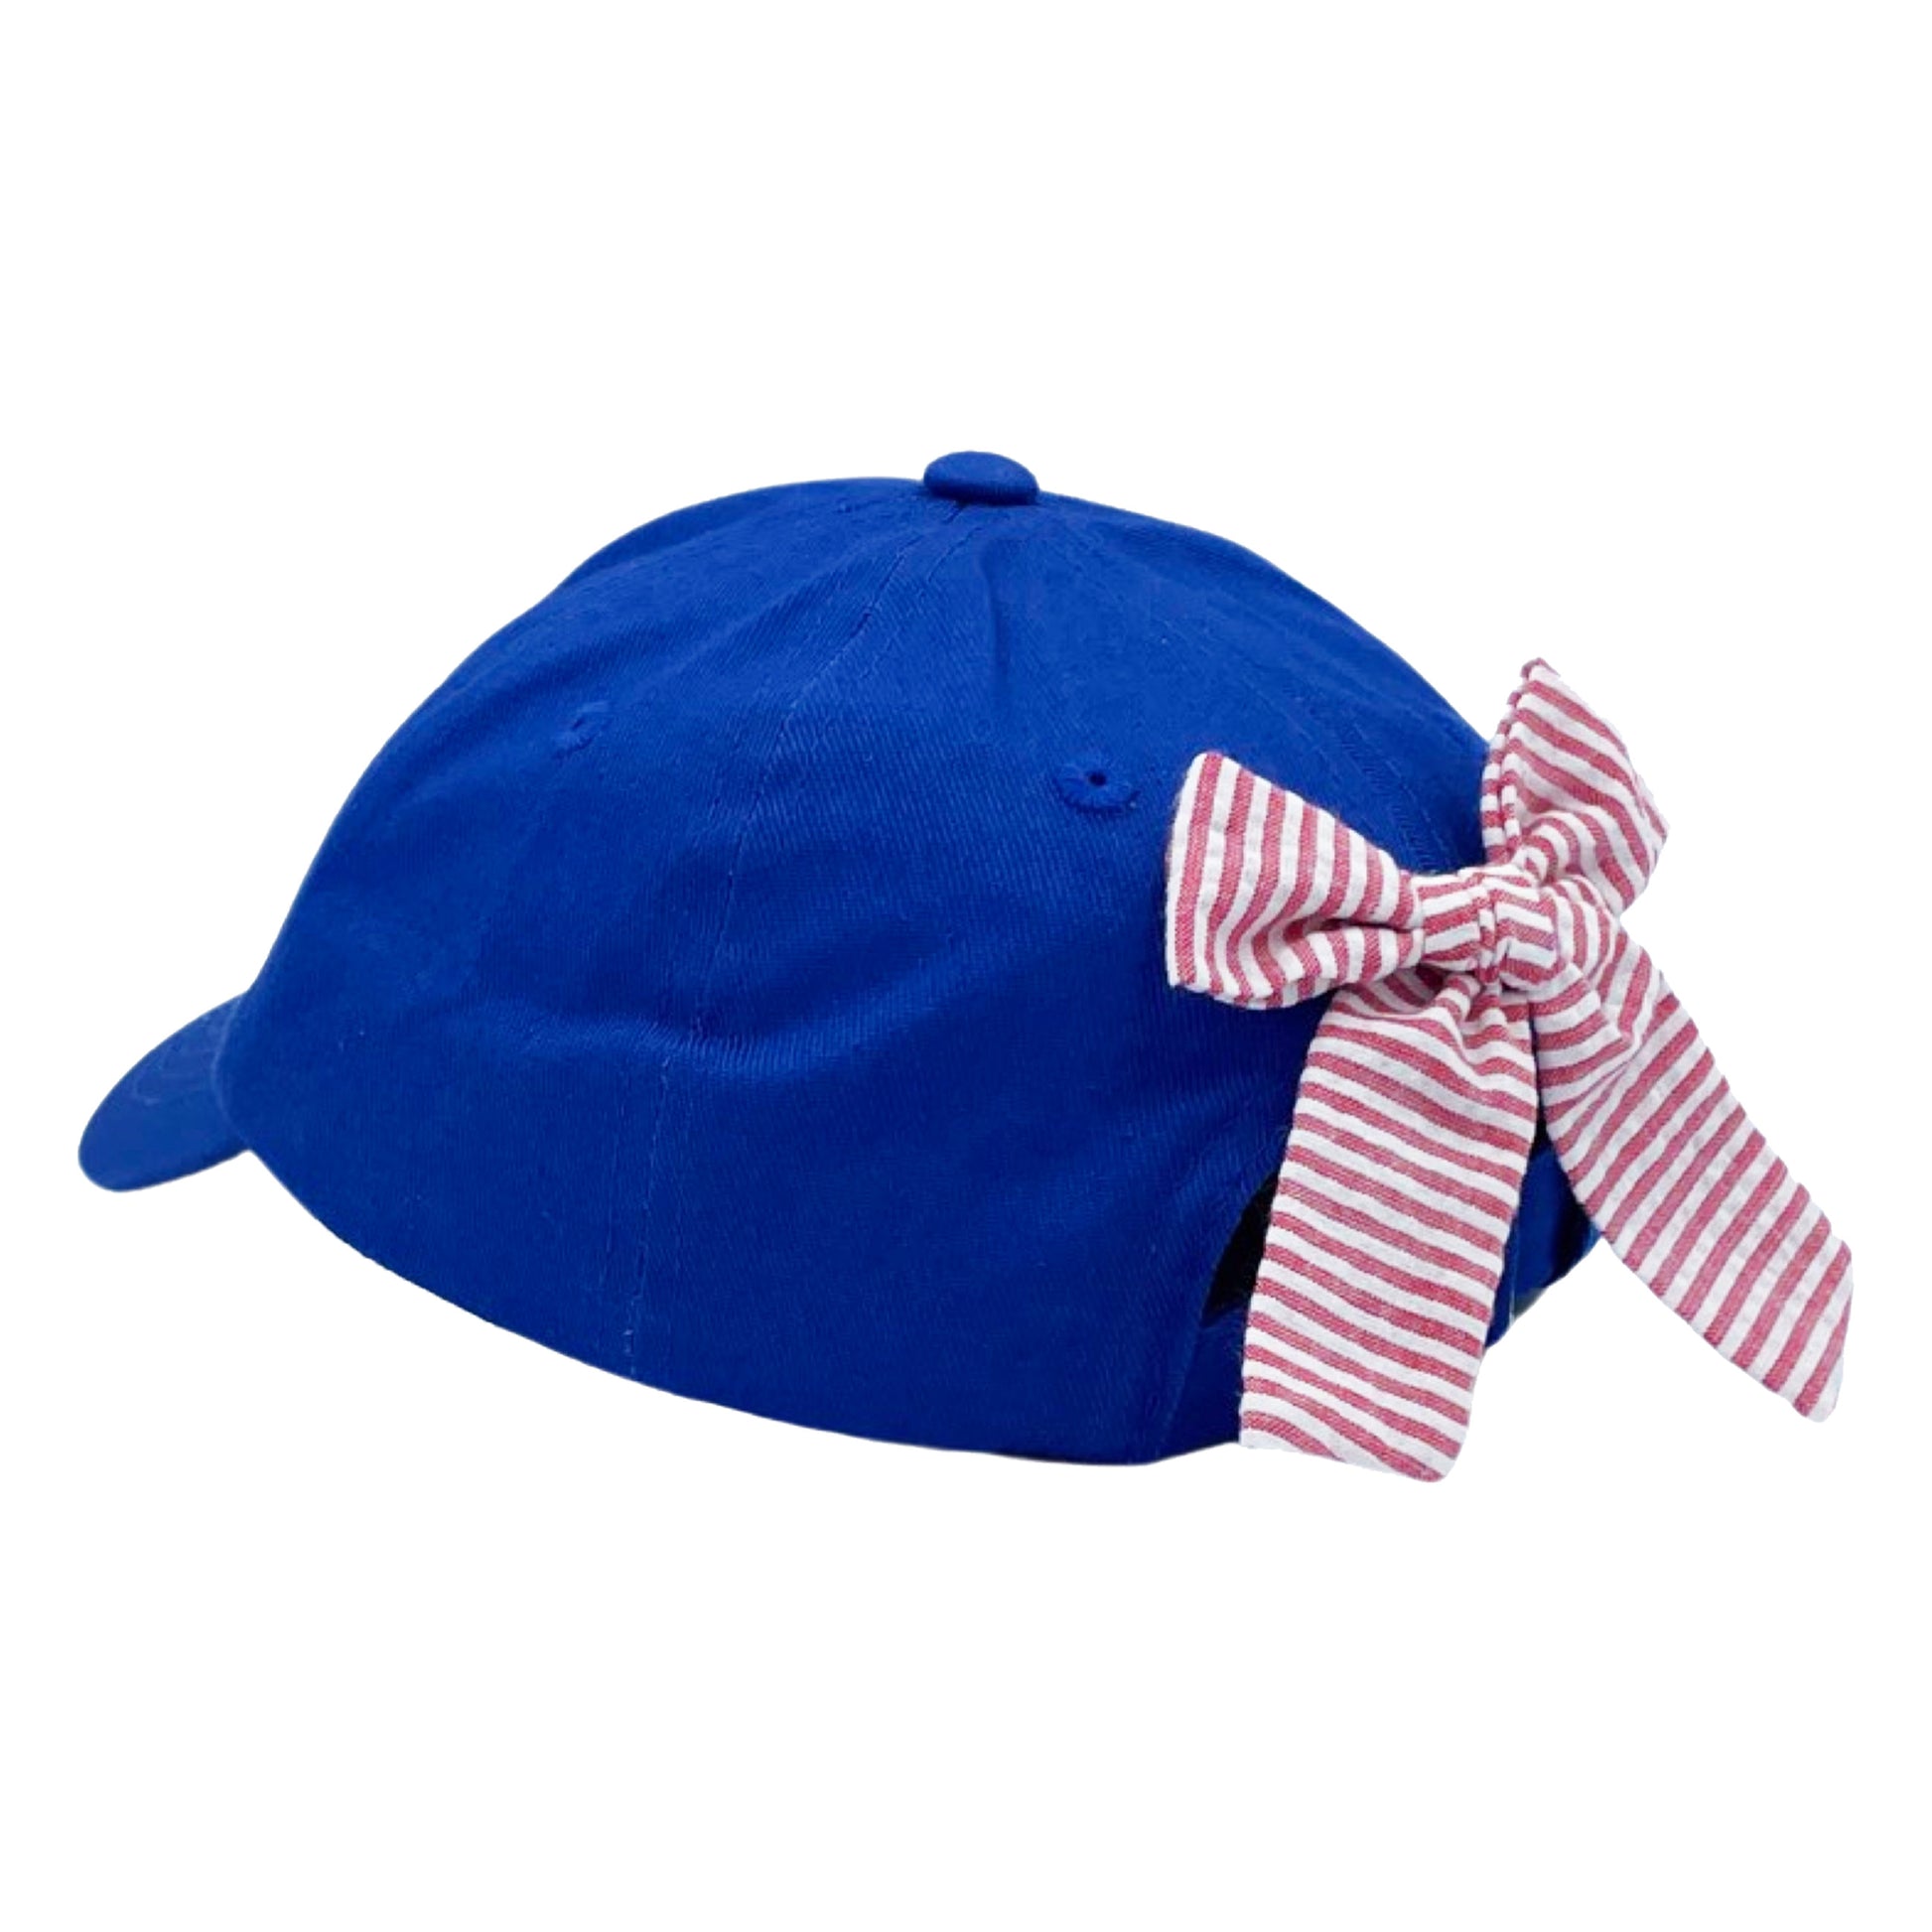 Bows for Belles Girl's Mustang Hat with Bow